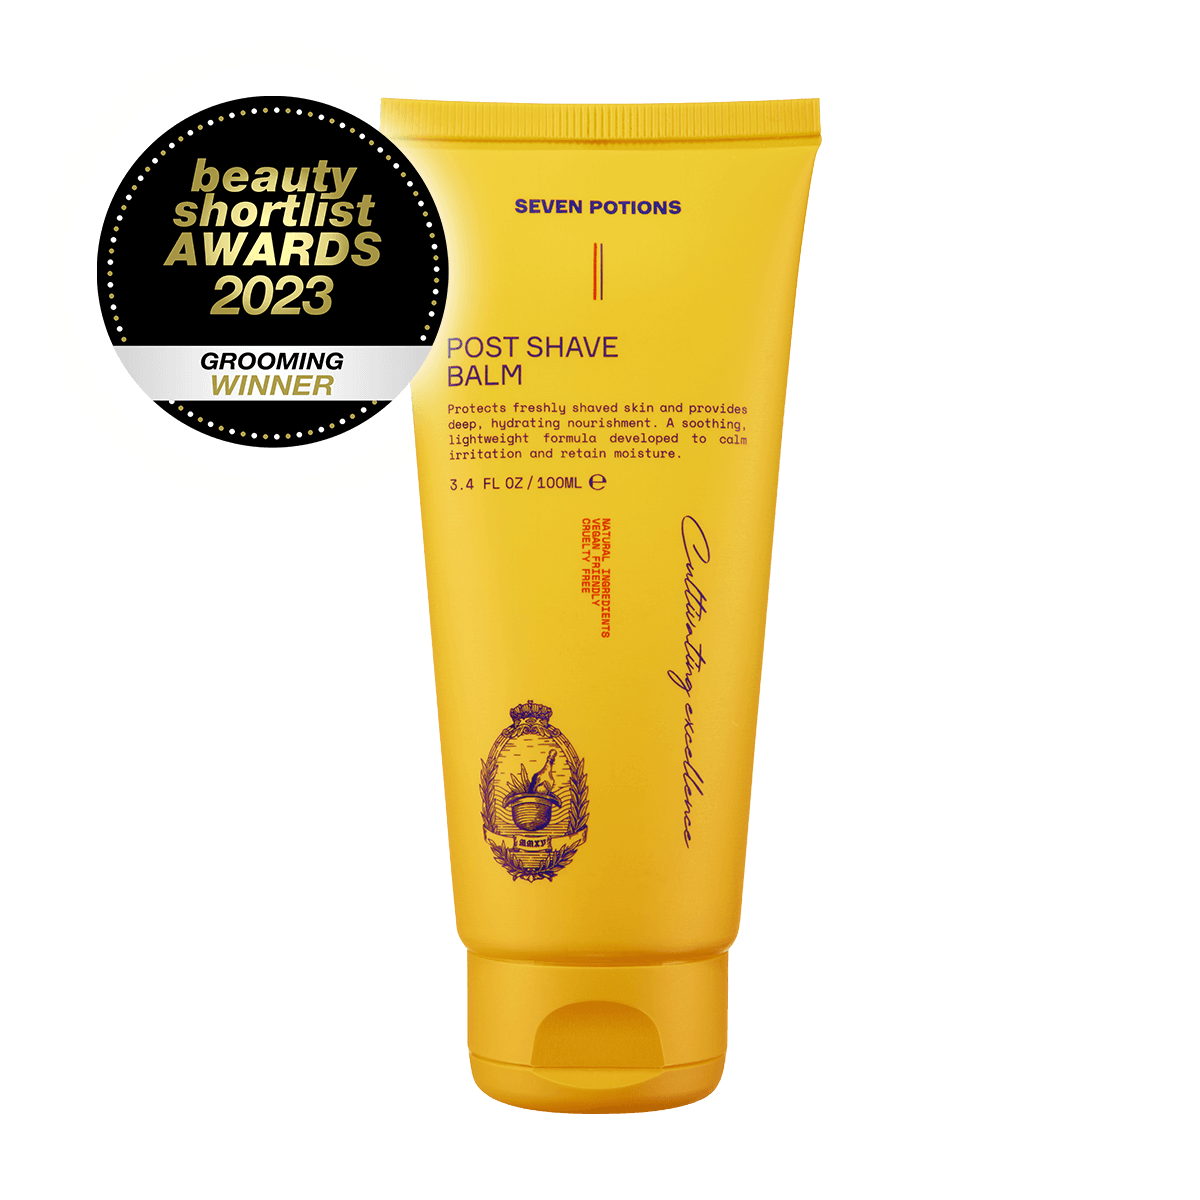 Seven Potions Post Shave Balm - Apply After Shaving To Soothe Irritation